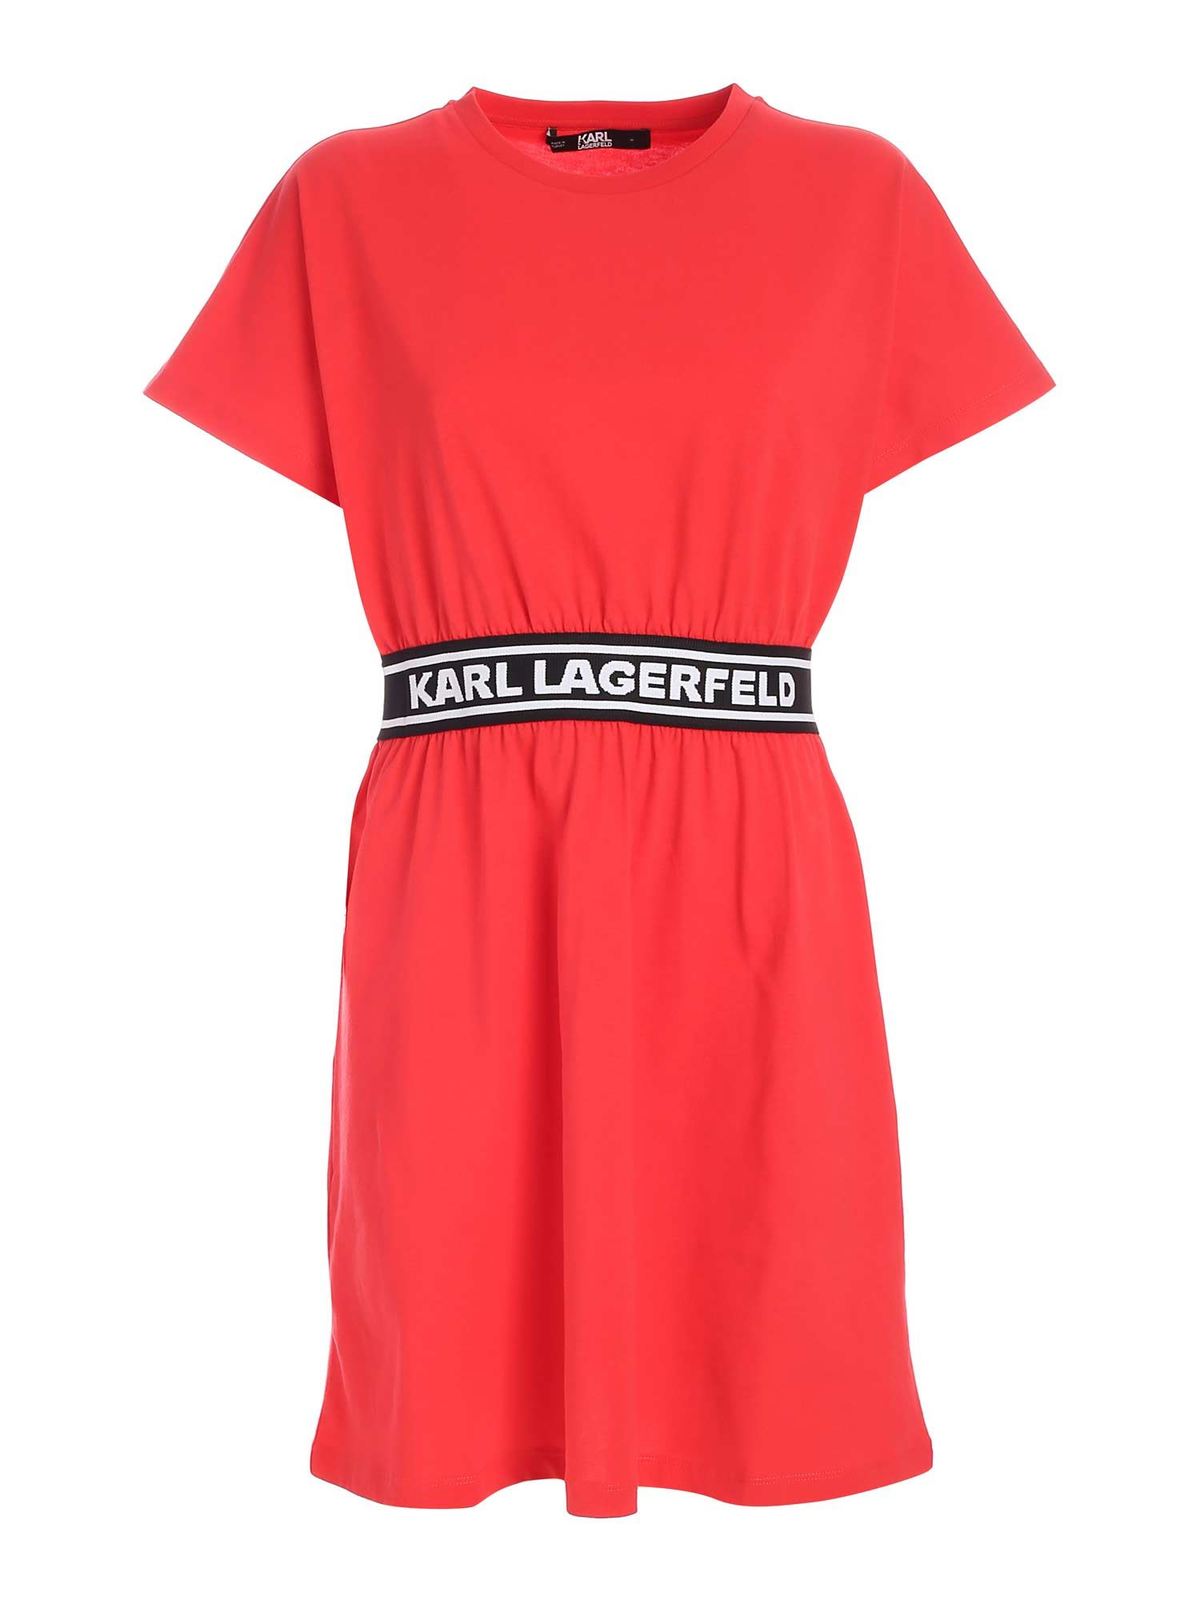 KARL LAGERFELD BRANDED BAND DRESS IN RED